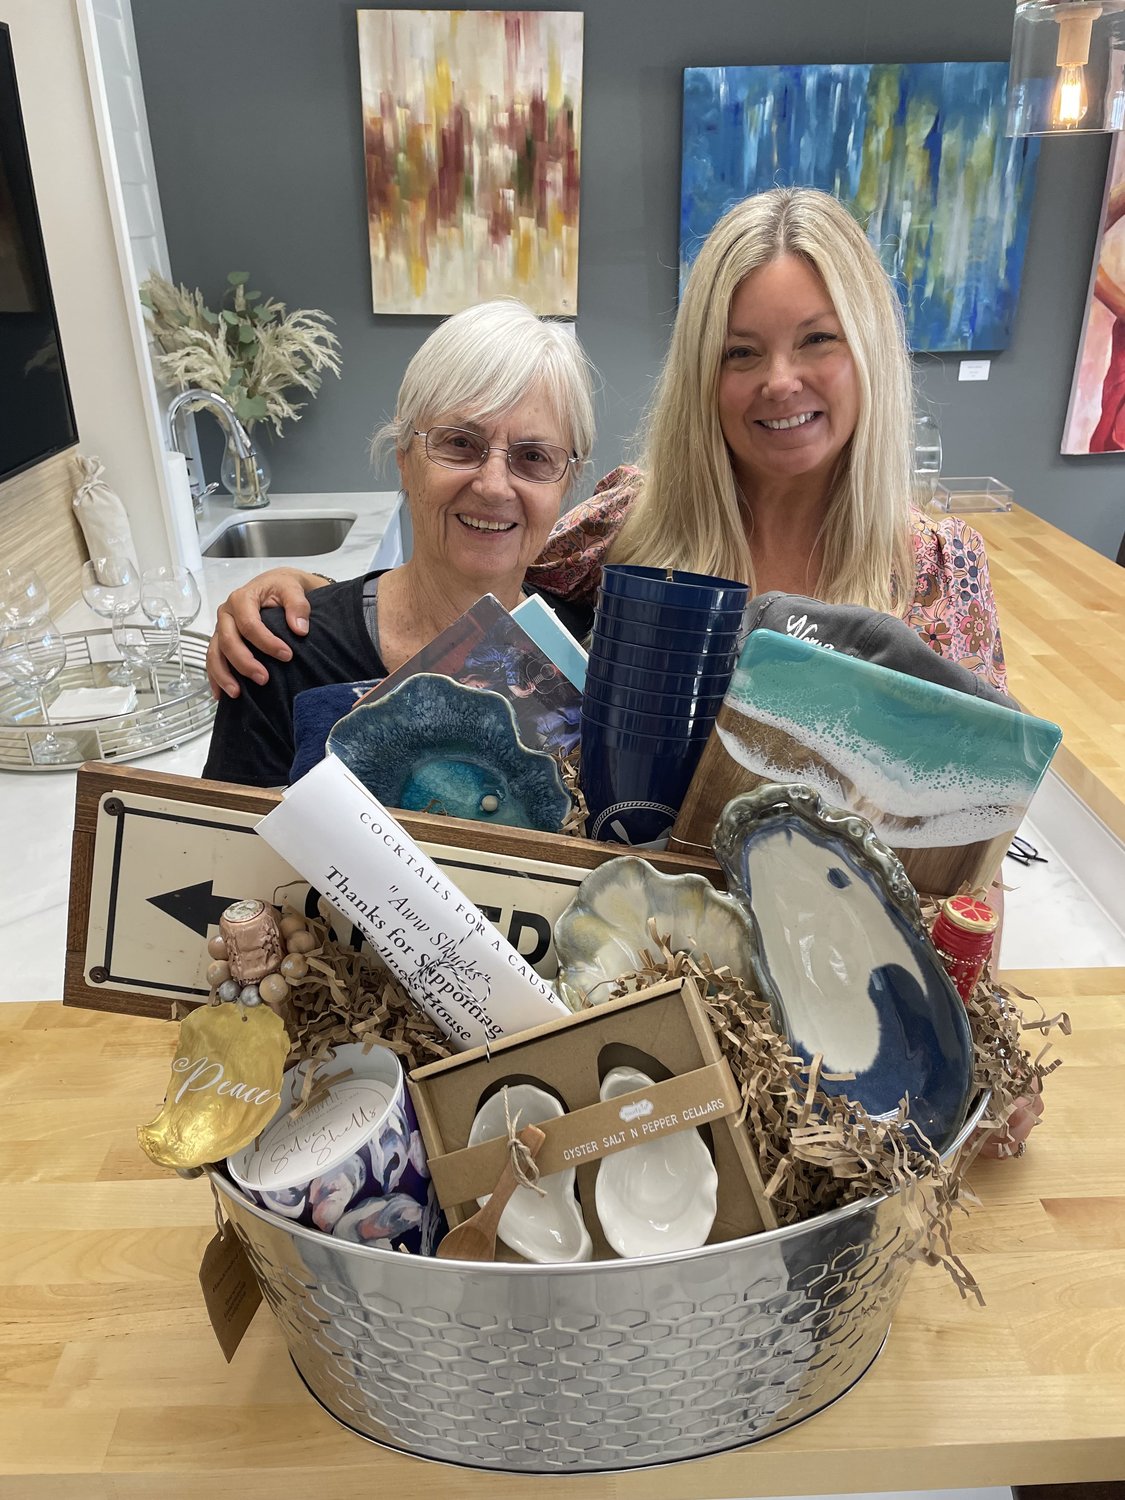 Priscilla Kania of Arnold (left) won the raffle and was congratulated by Tina Bradshaw, partner of the SnyderlBradshaw Group.